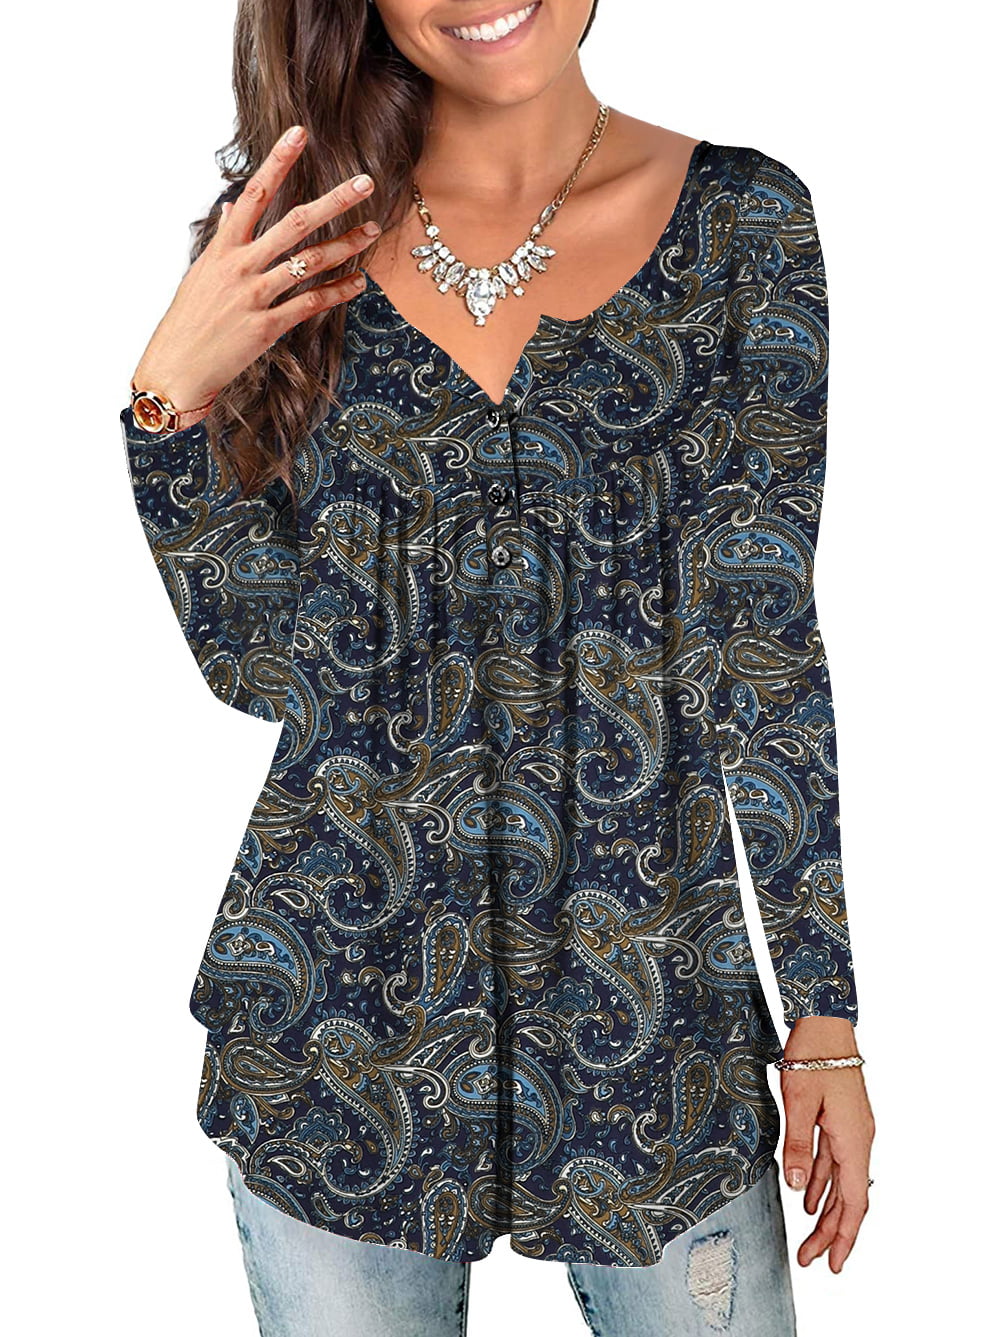 Traleubie Plus Size Tunic Tops Long Sleeve Casual Floral Printed Henley ...